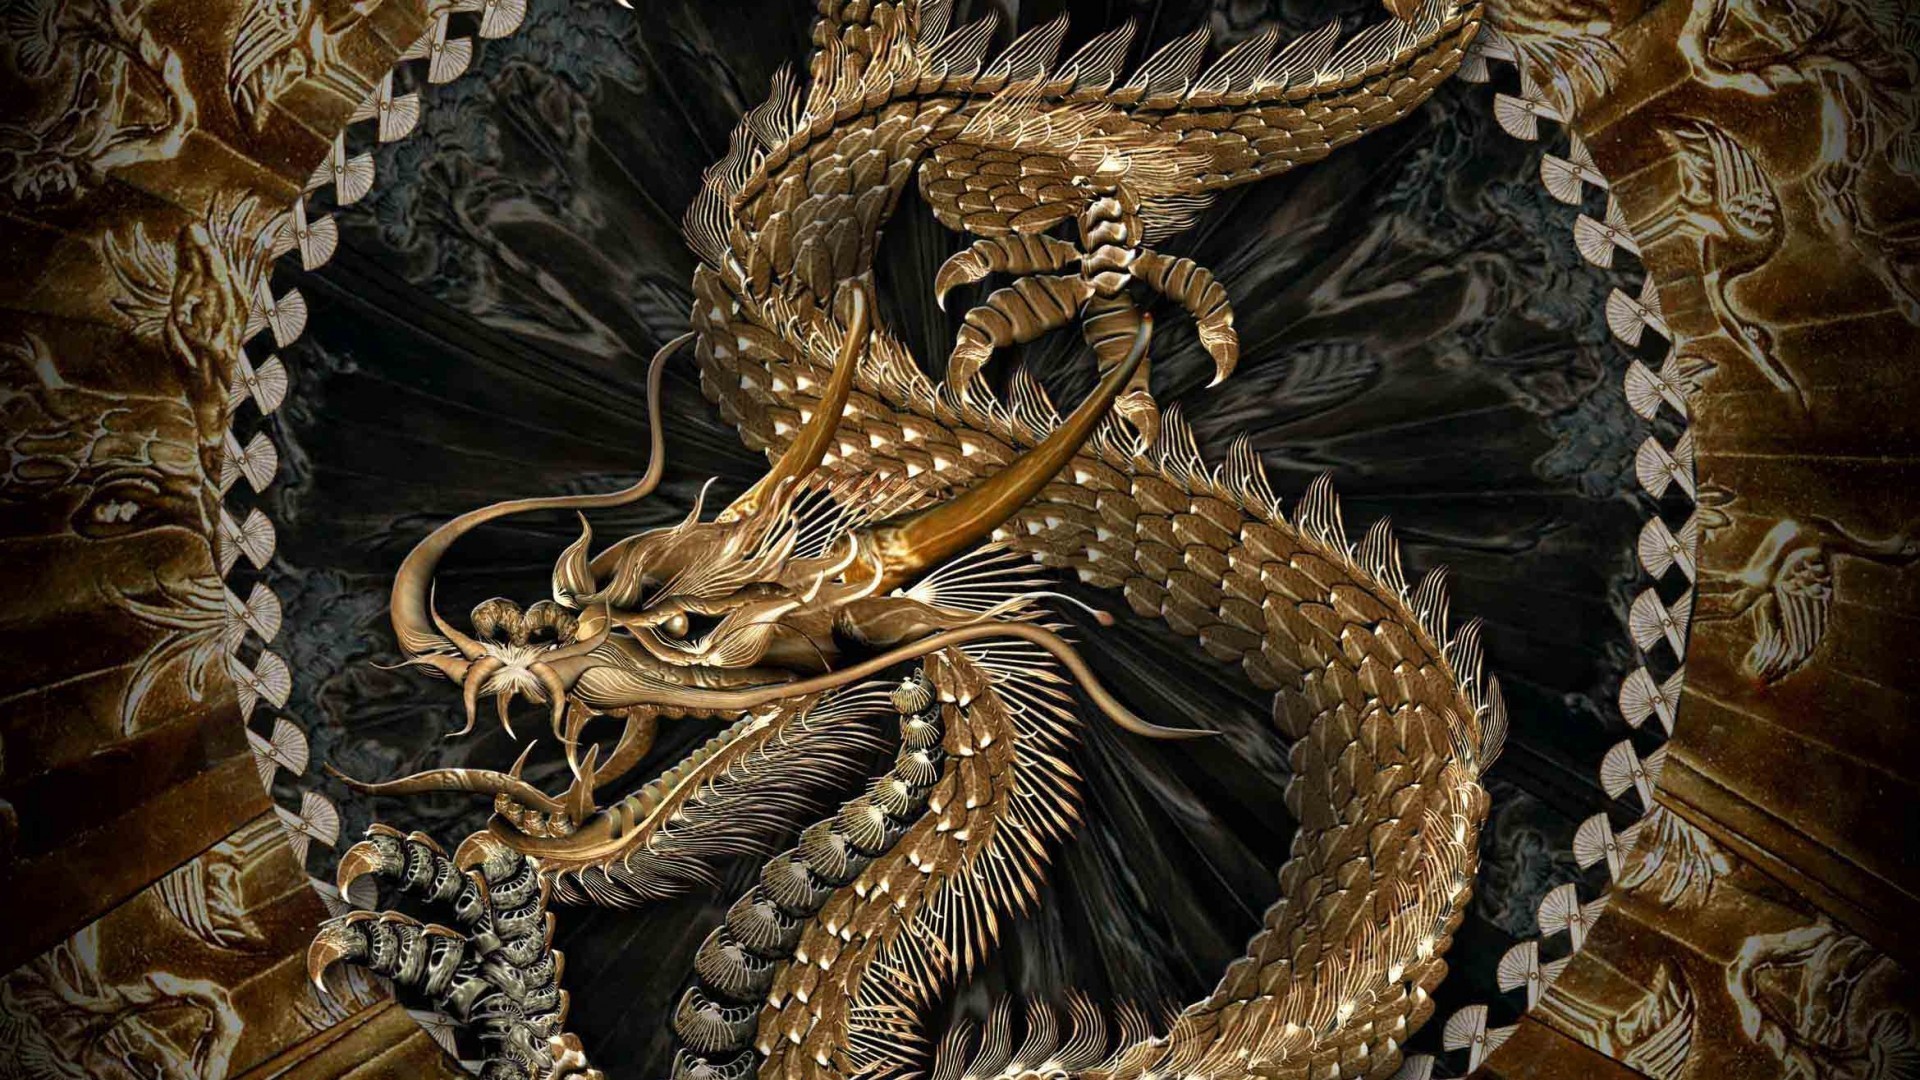 1920x1080 best images about Chinese Dragons on Pinterest Chinese | HD Wallpapers |  Pinterest | Dragons, Chinese dragon and Wallpaper